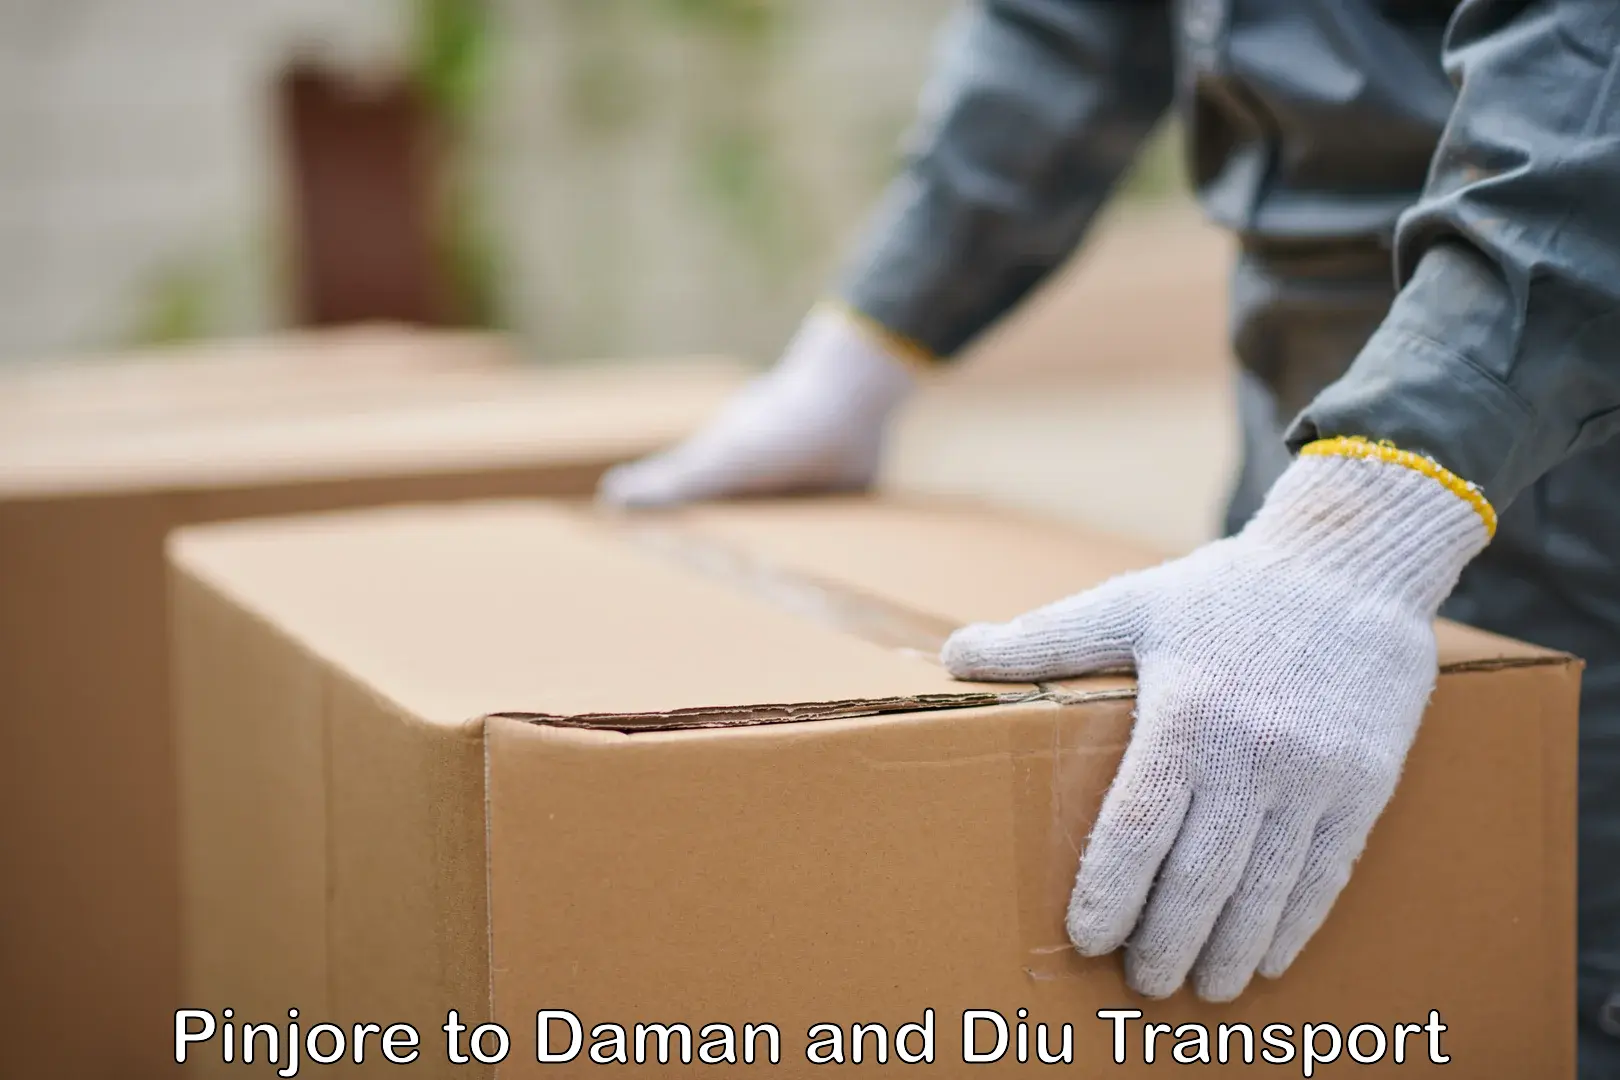 Container transport service Pinjore to Daman and Diu